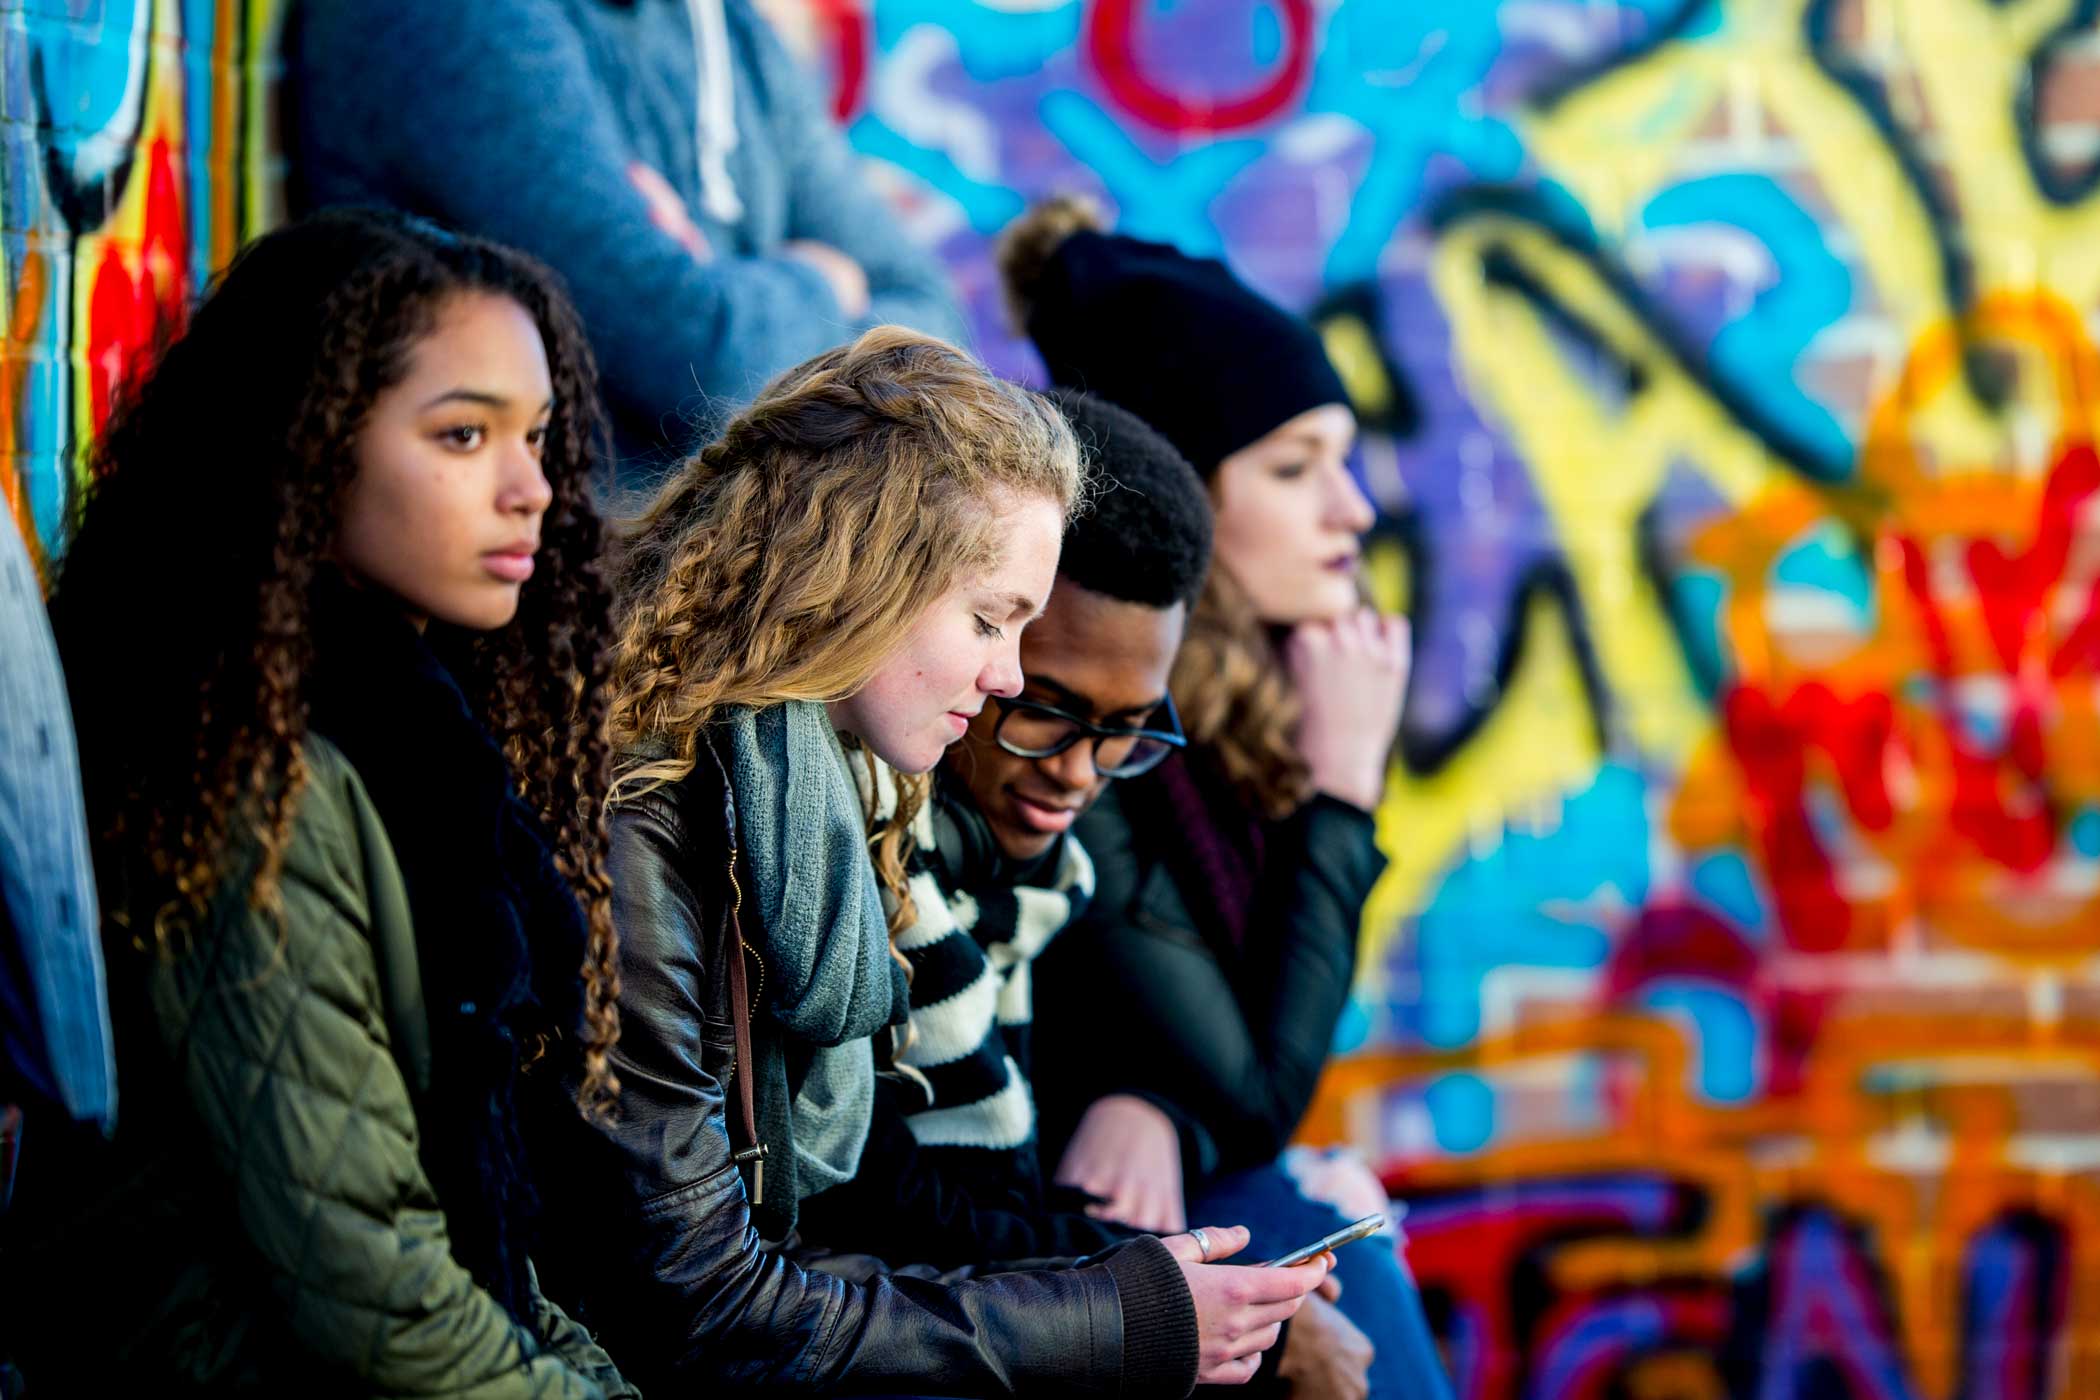 a group of youth sitting next to a colorfully painted wall.